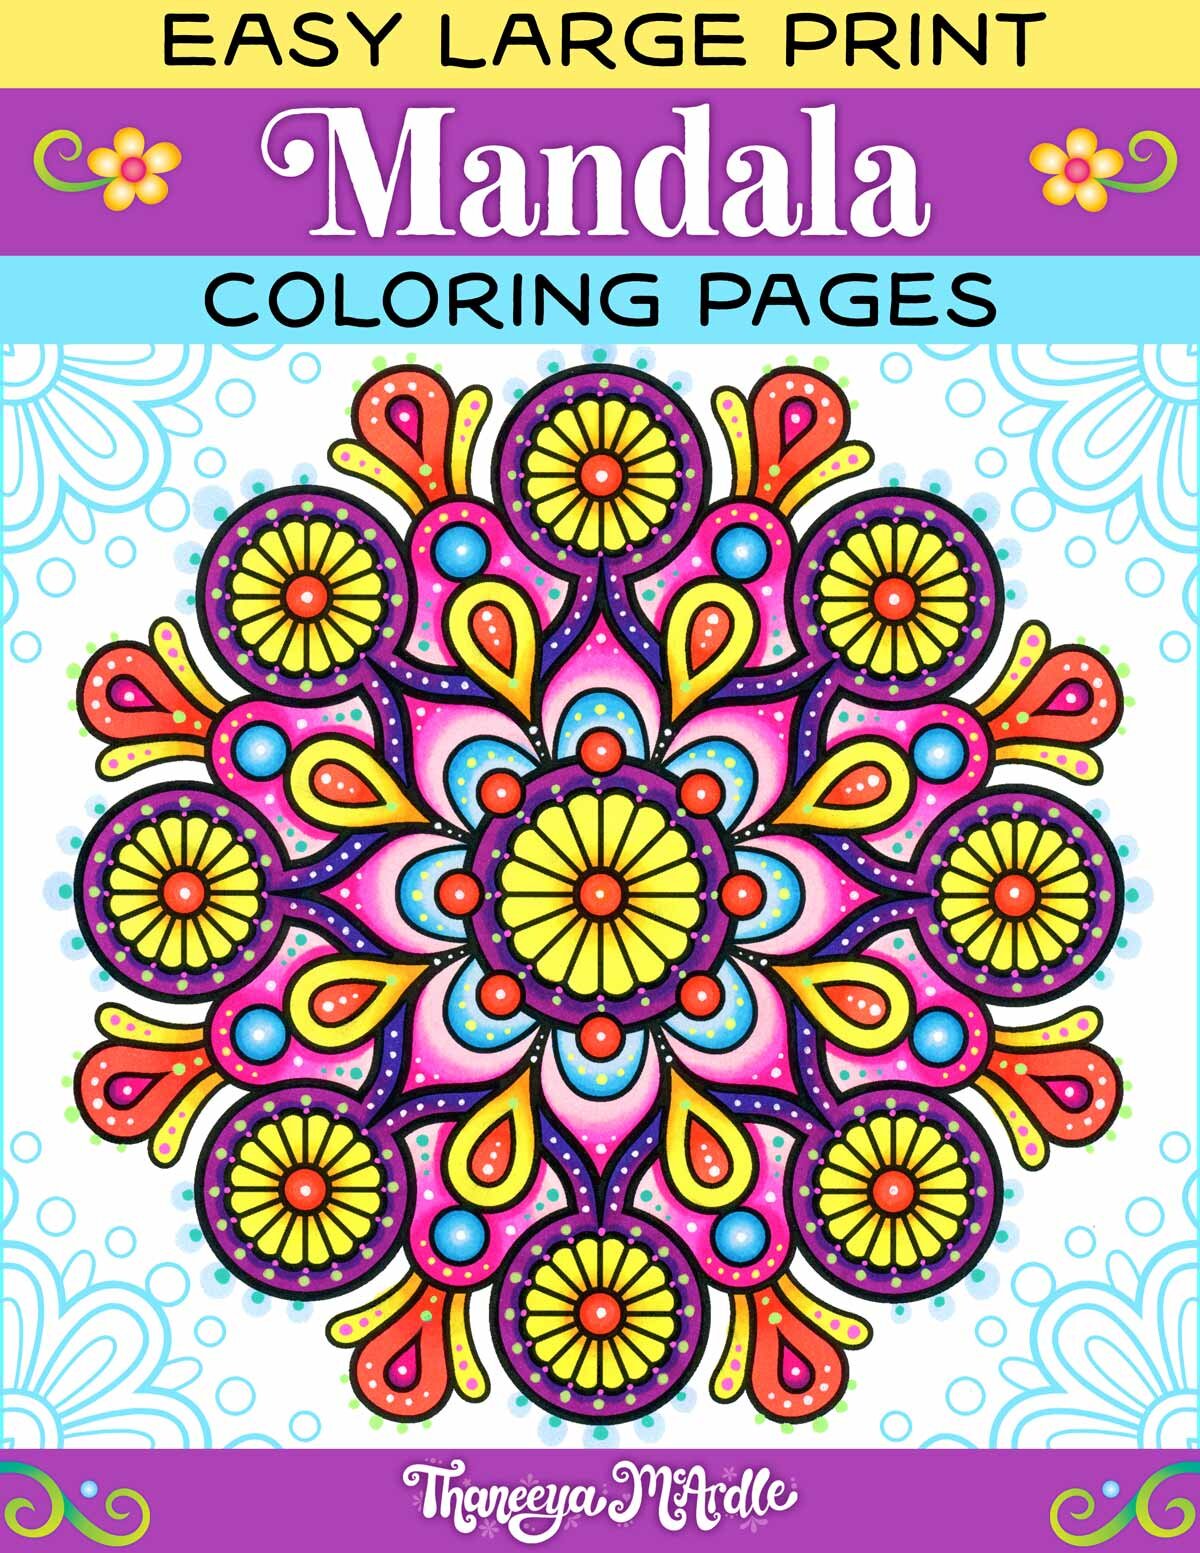 https://images.squarespace-cdn.com/content/v1/5608382ae4b017614f857528/1621027315878-IFY07YCHS3YRD0CMY71C/Easy-Mandala-Coloring-Pages-by-Thaneeya-McArdle-Cover.jpg